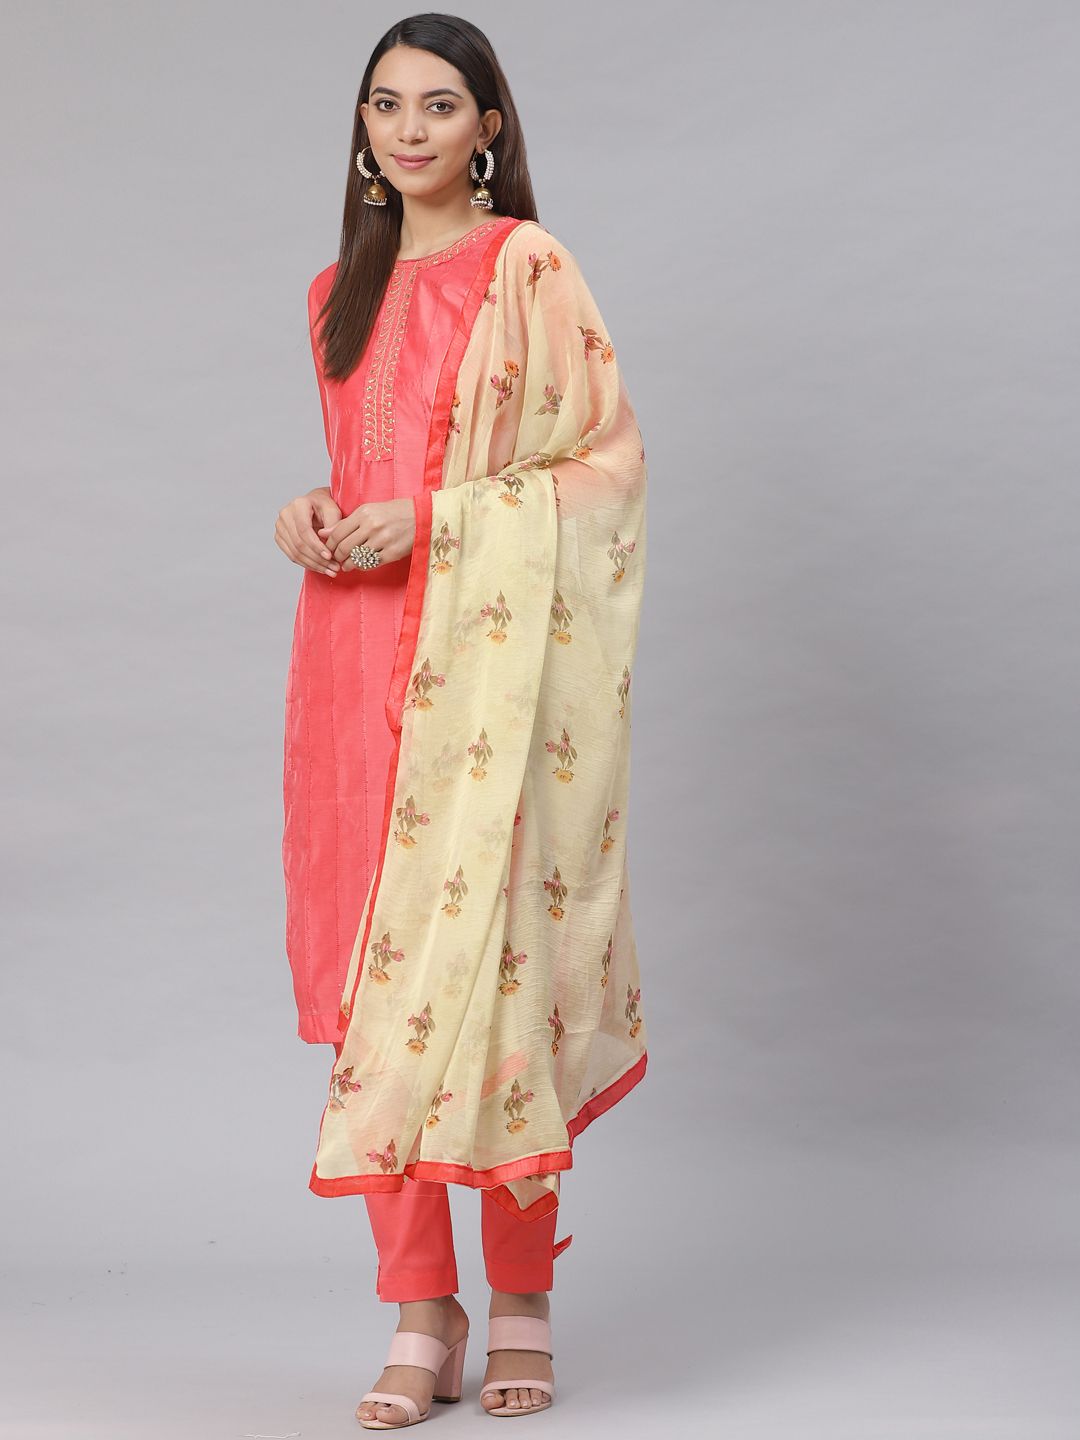 Saree mall Peach-Coloured Embroidered Semi-Stitched Dress Material Price in India